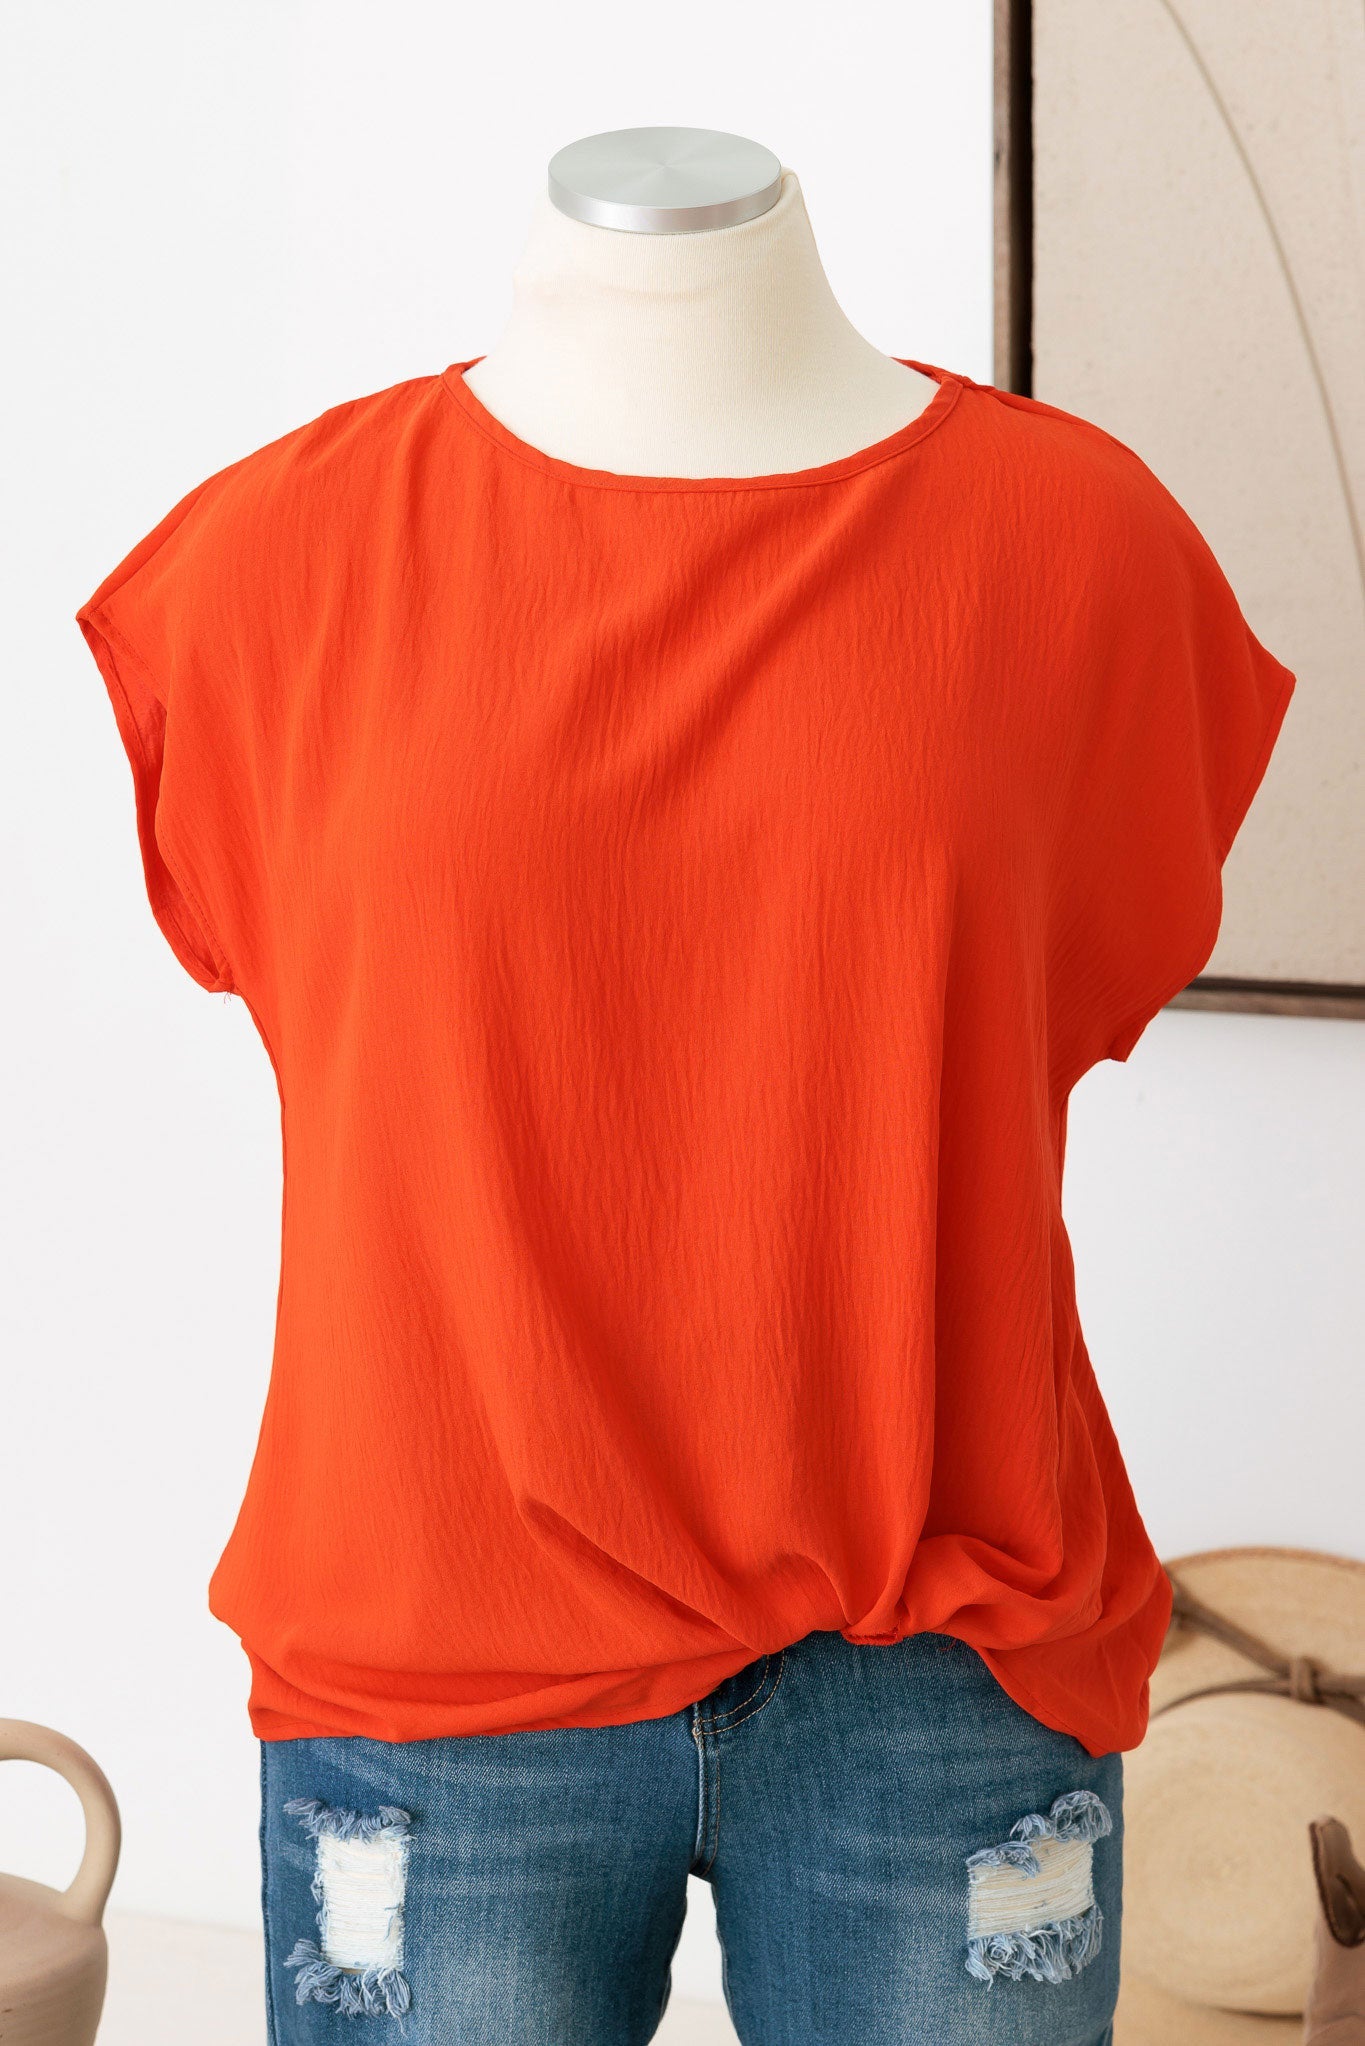 SHIRT- Plus Size Front Knot Solid Woven Tee